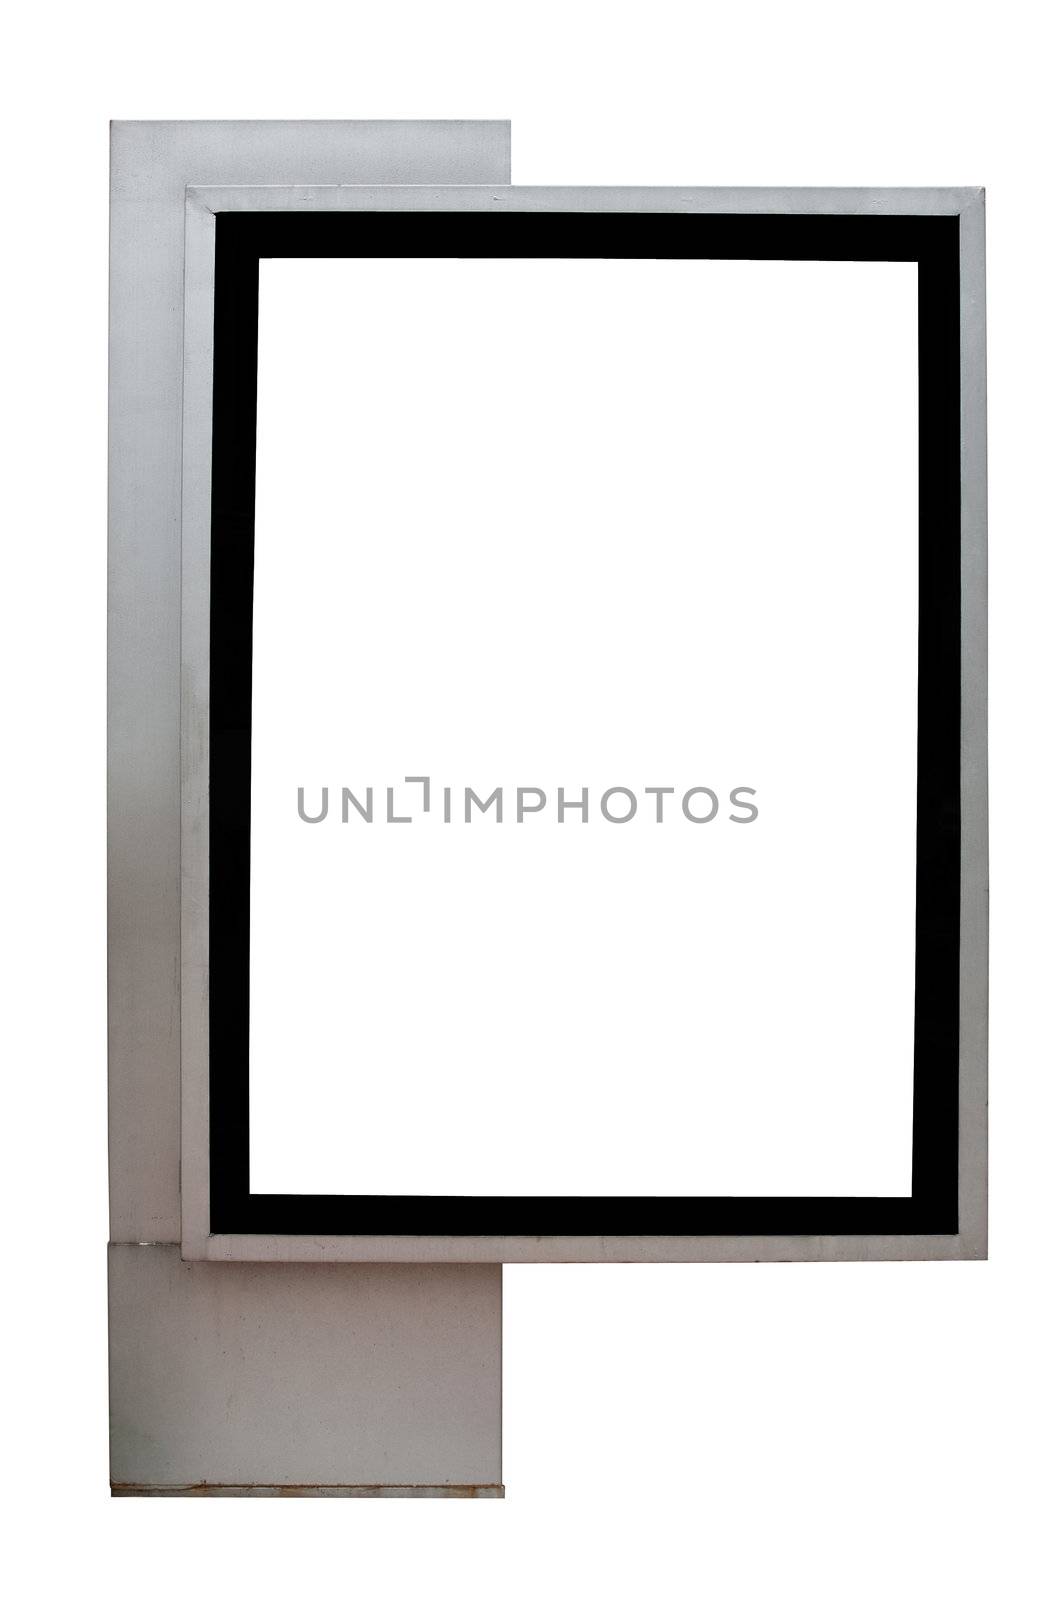 Blank billboard display at sidewalk with clipping path for your advertising